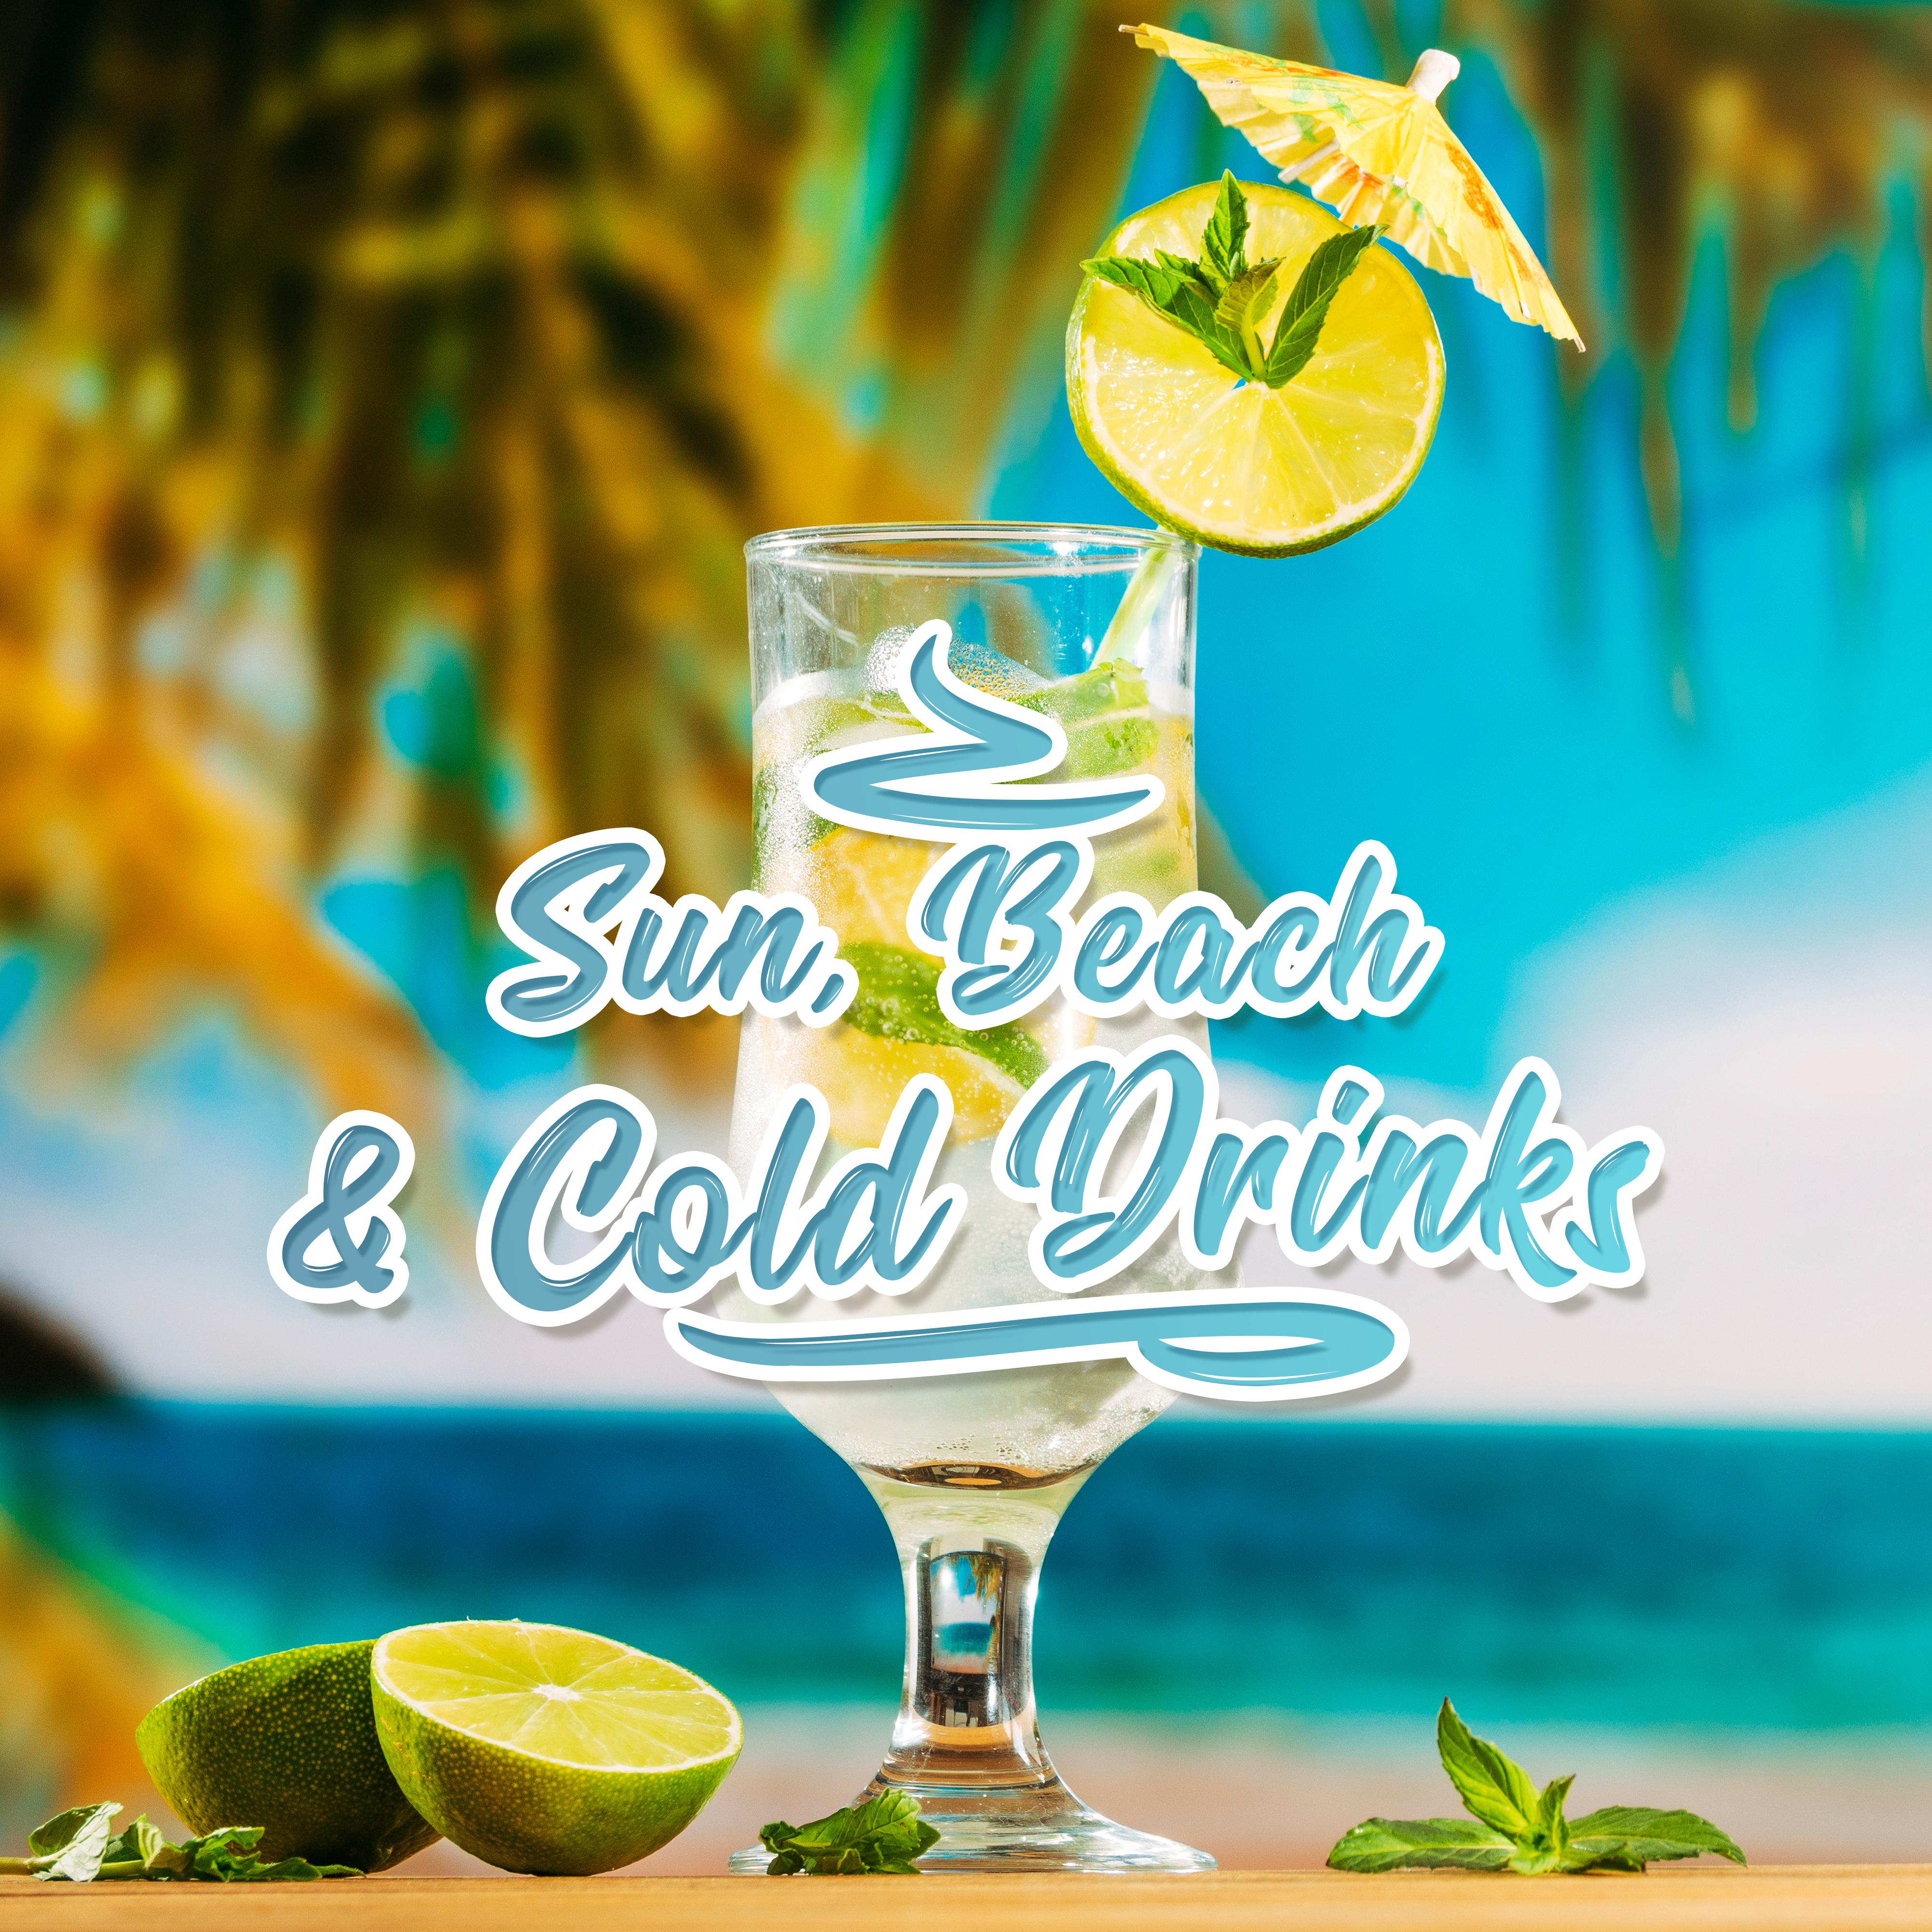 Sun, Beach & Cold Drinks: 2019 Chillout Music Selection, Perfect Vibes for Total Relaxation, Calming Ambient Melodies & Slow Sensual Beats, Summer Vacation Celebration Perfect Background Songs